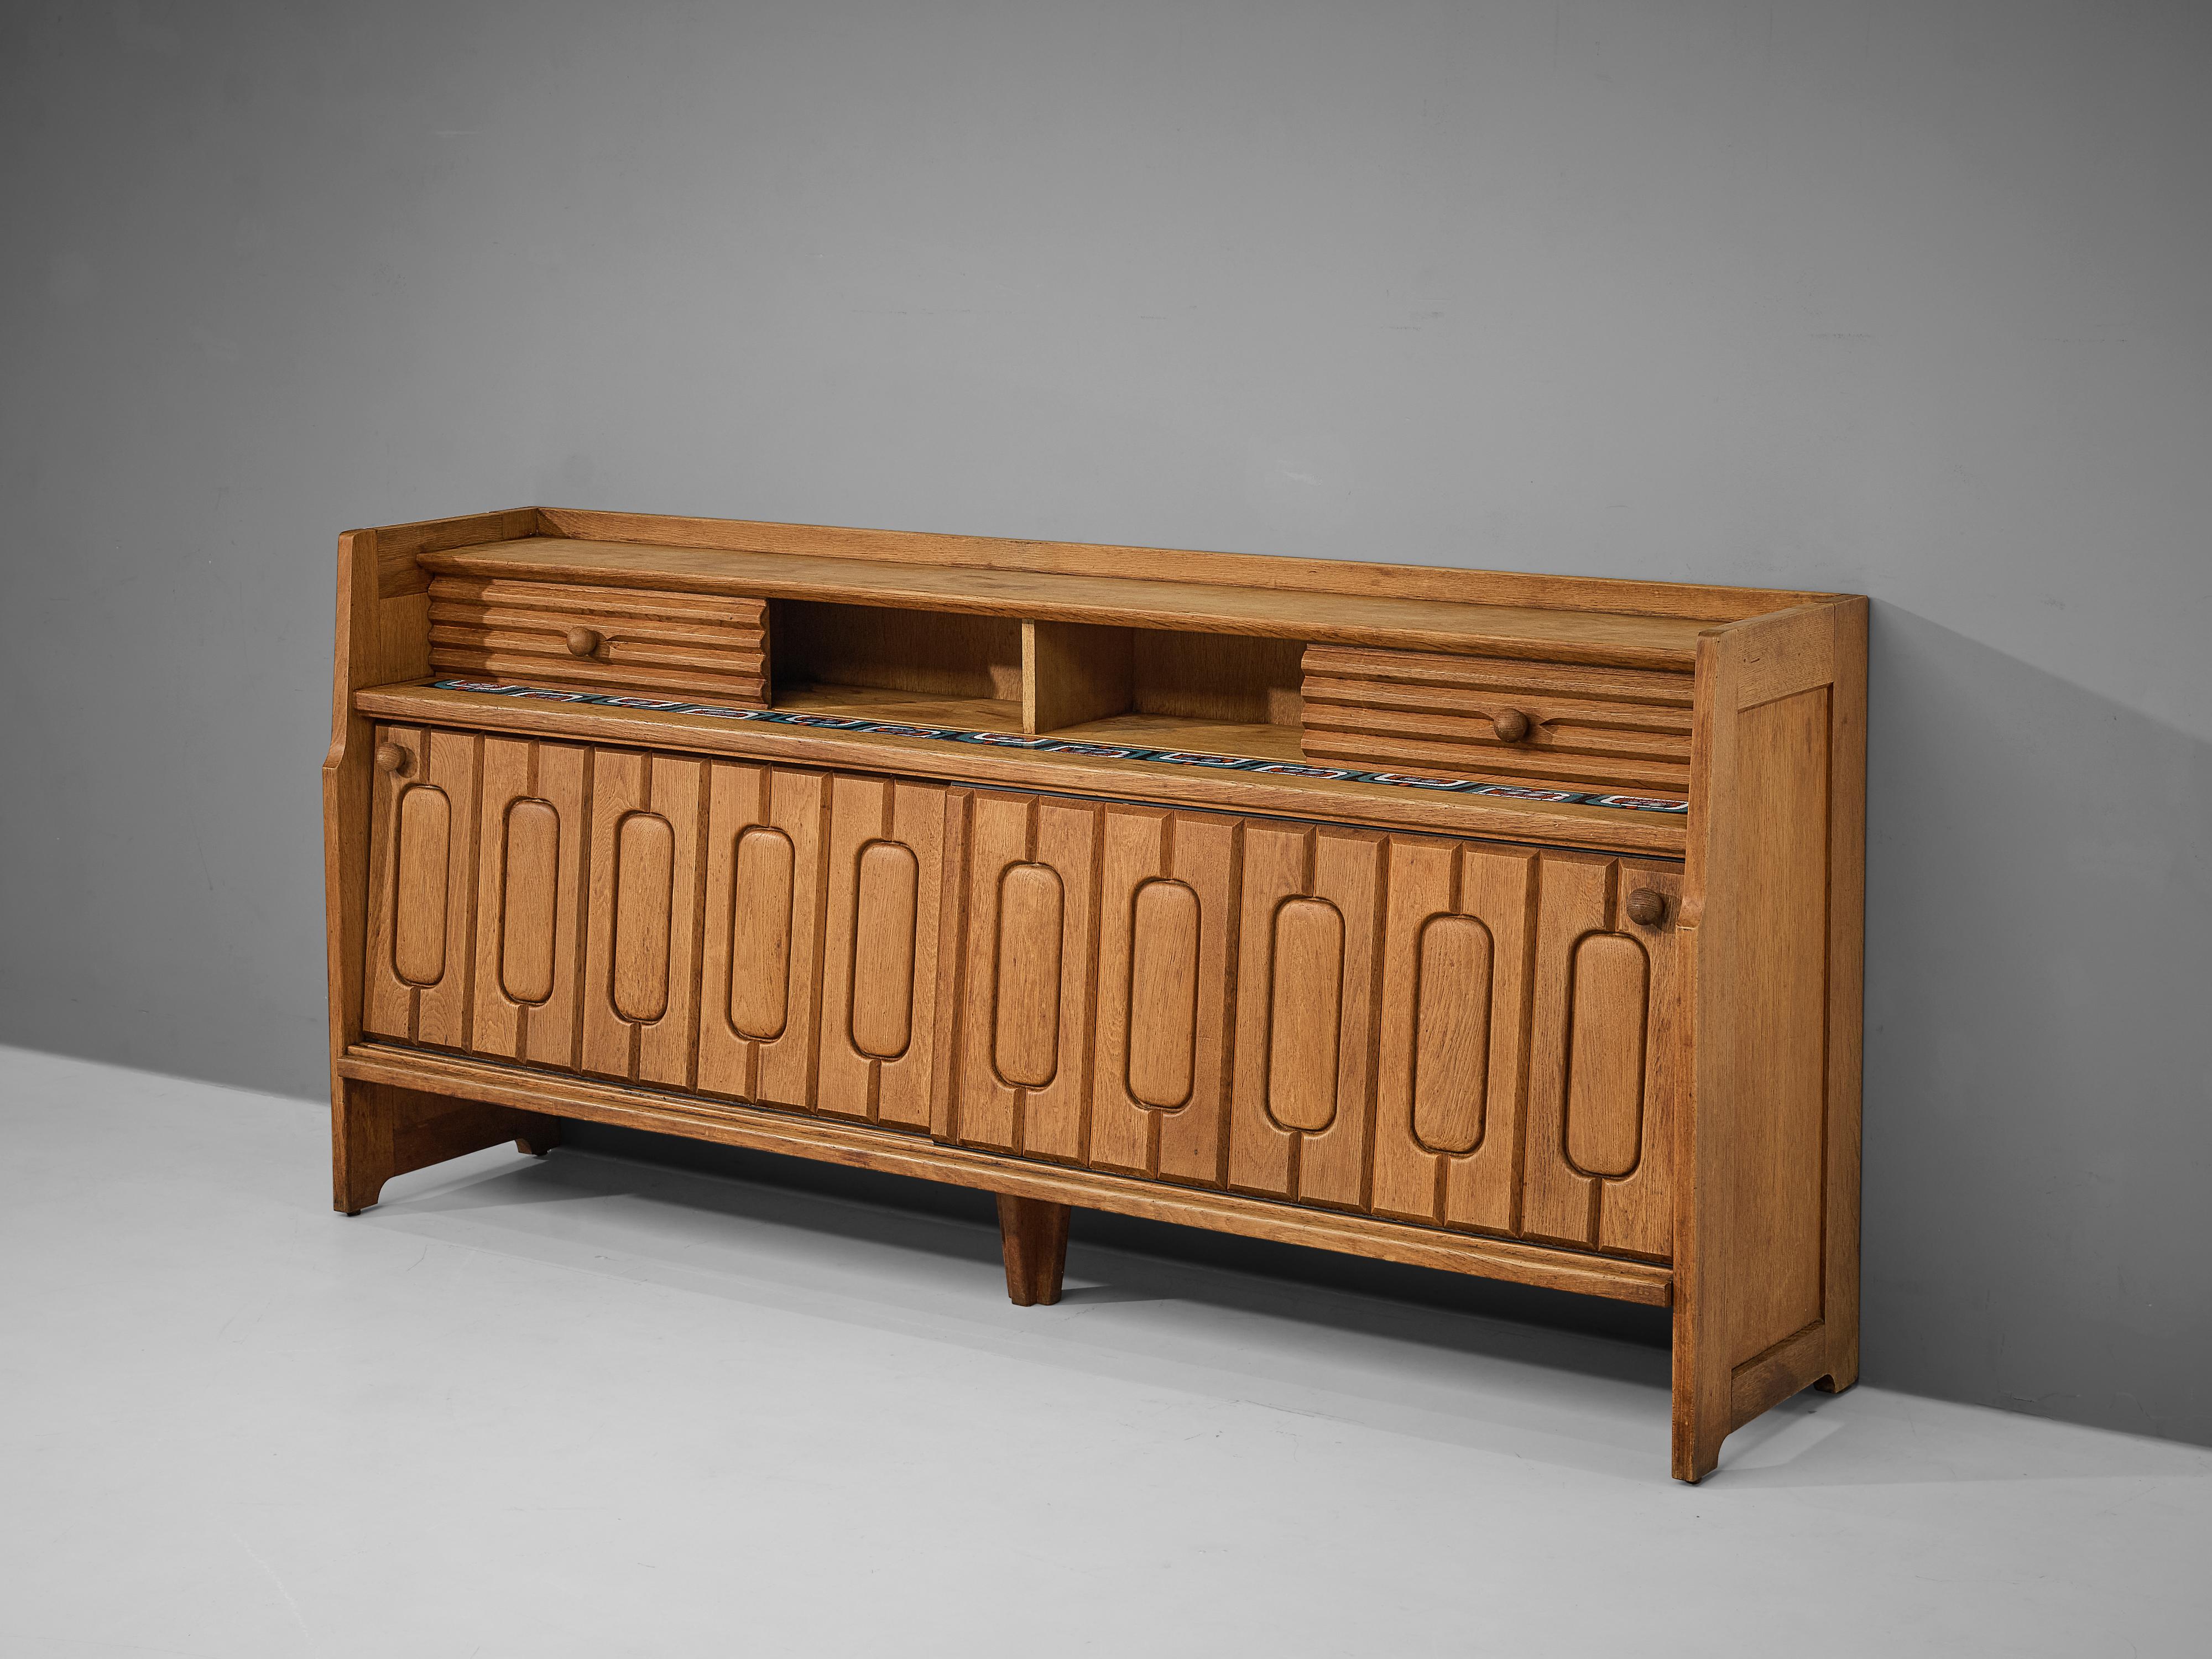 Guillerme et Chambron, sideboard, oak, ceramic, France, 1960s

Credenza in oak by French designer due Guillerme & Chambron. This sideboard is equipped with two sliding-doors and storage space on top. The front of the sideboard is beautifully